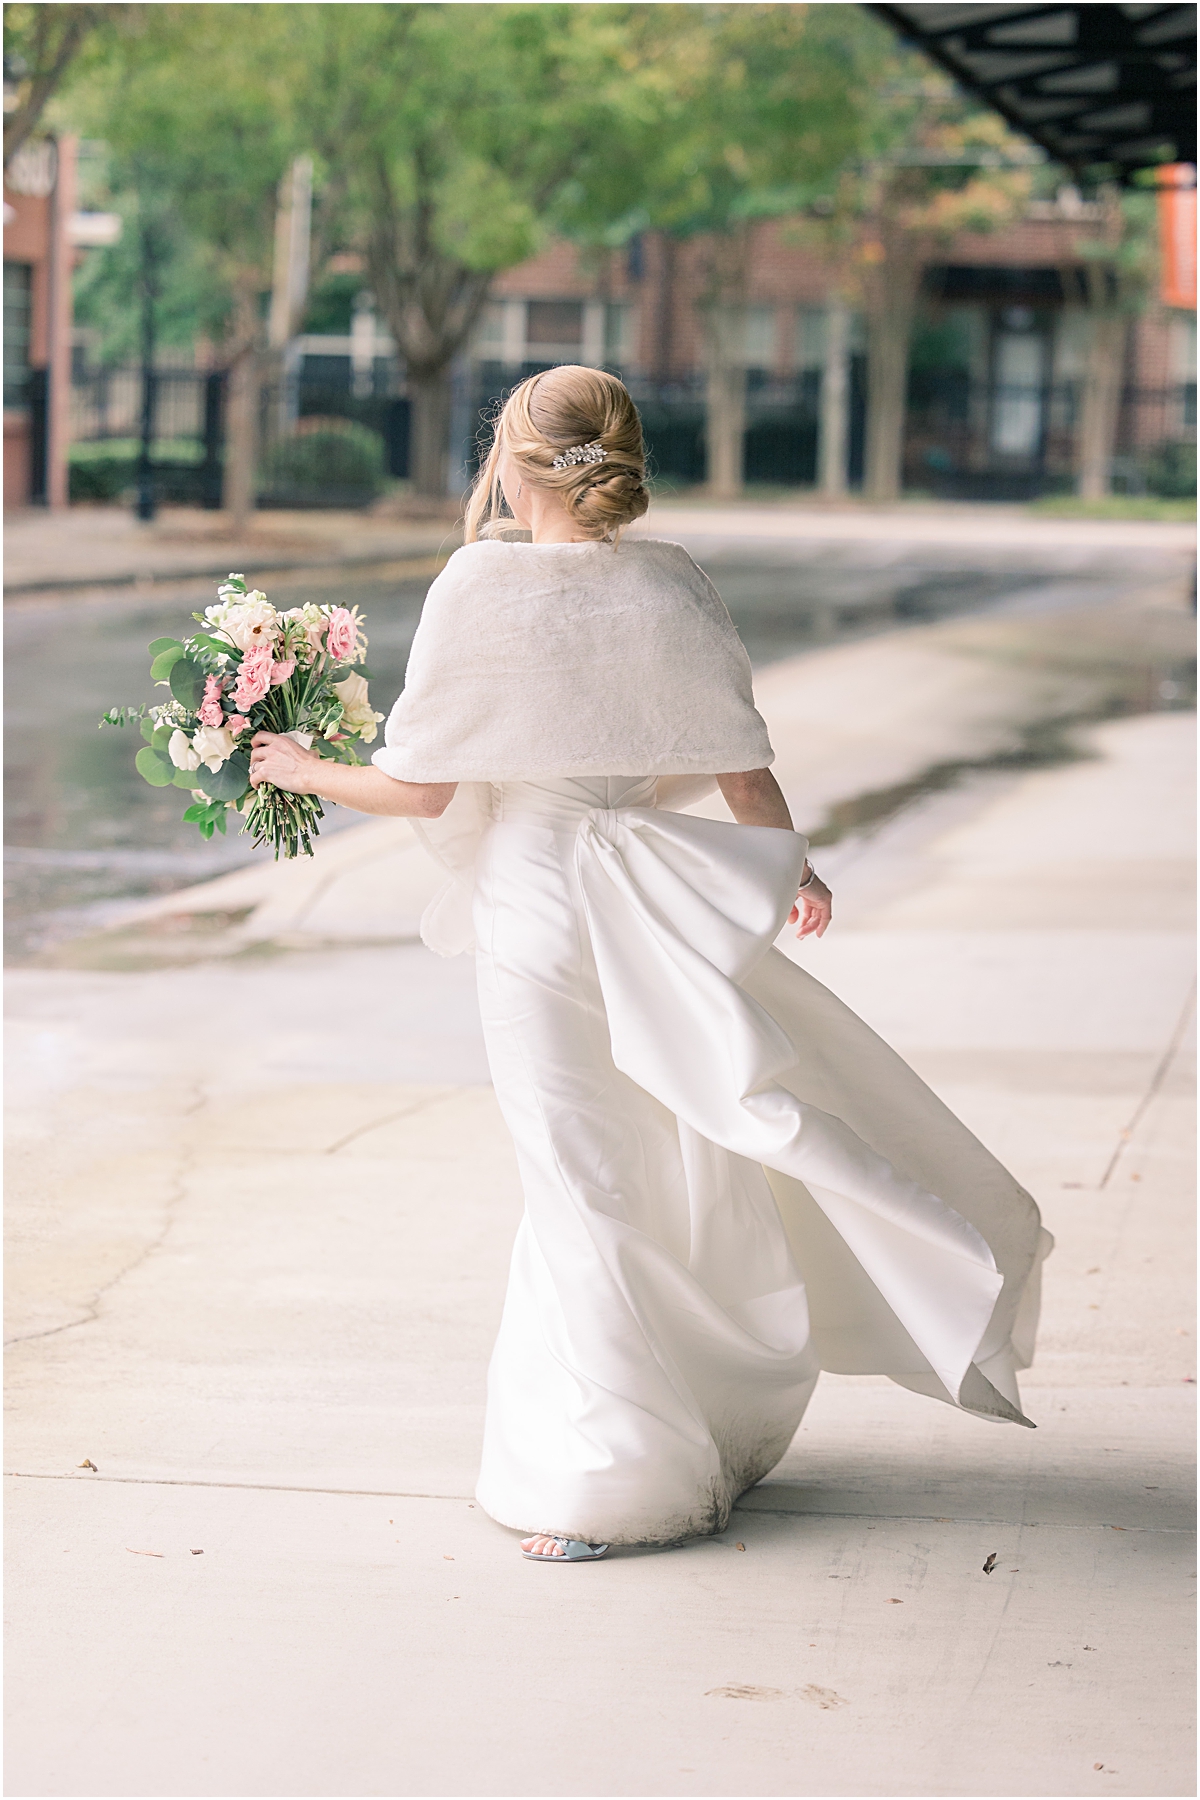 view of the back of Rebecca's elegant wedding dress with a big white bow and white fur cape as she walks away